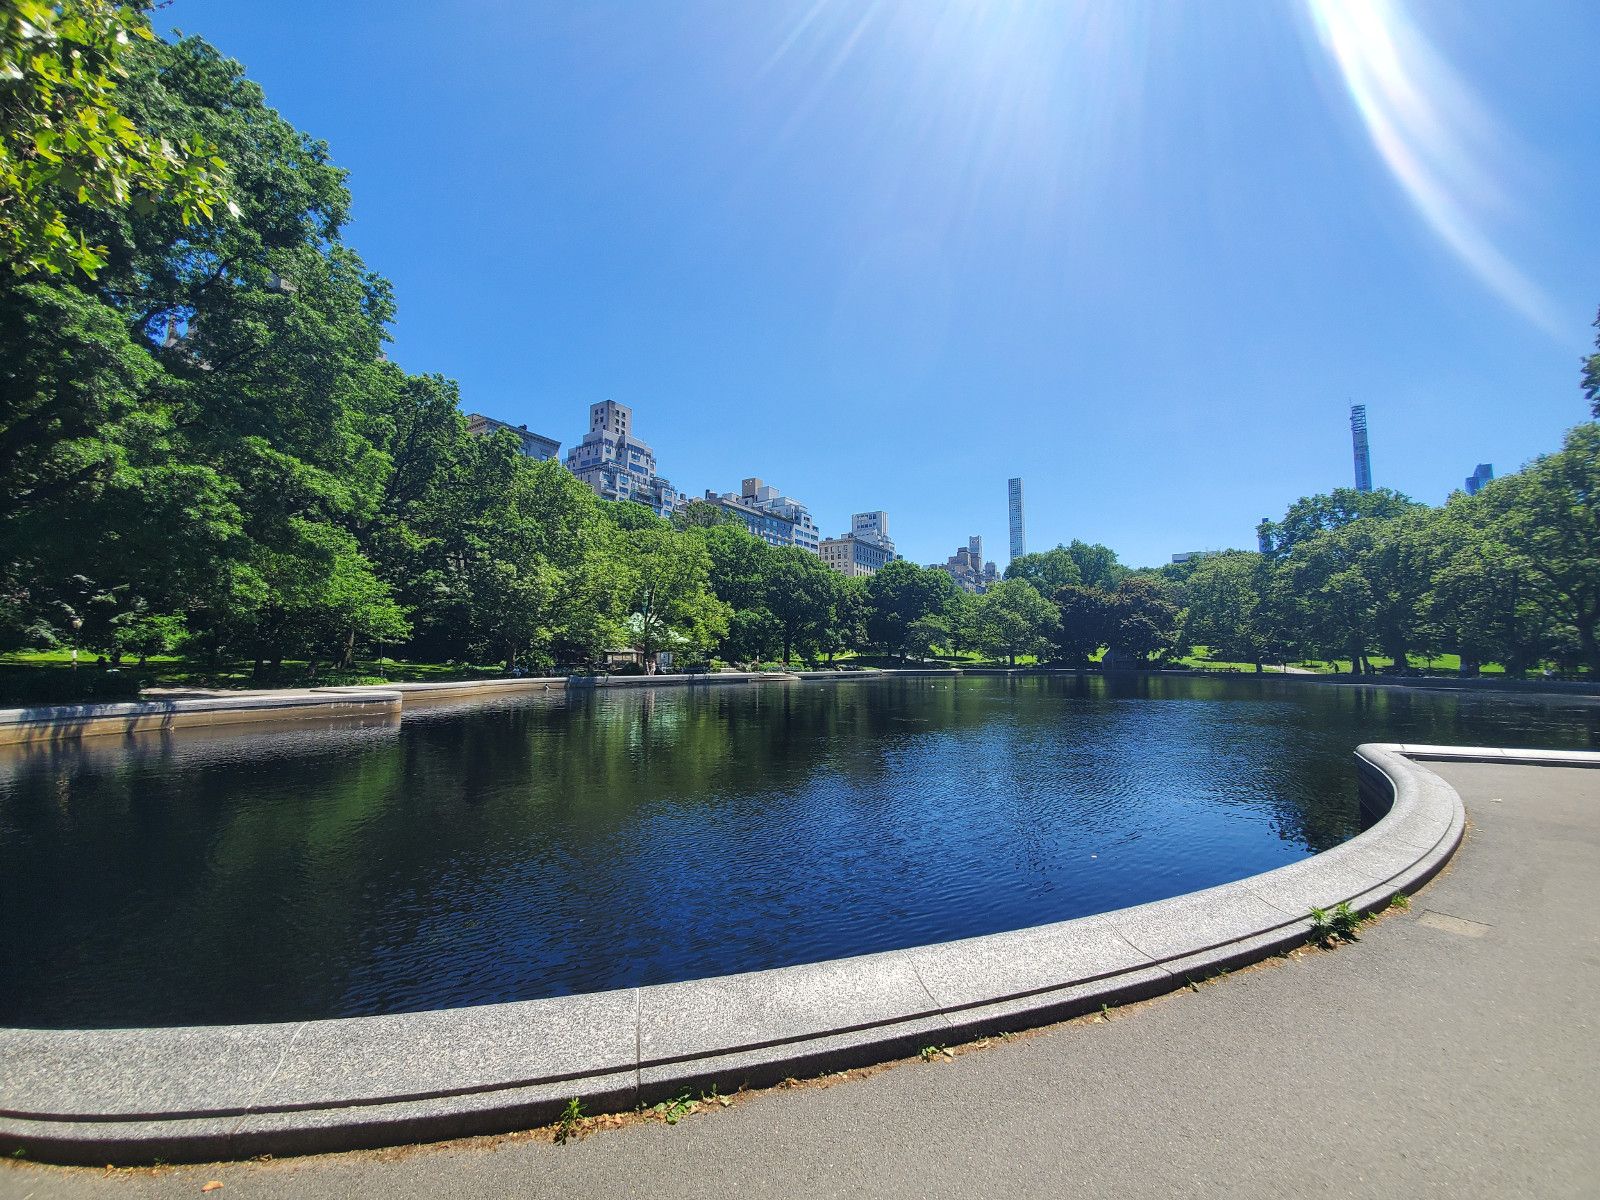 Conservatory waters in Central Park